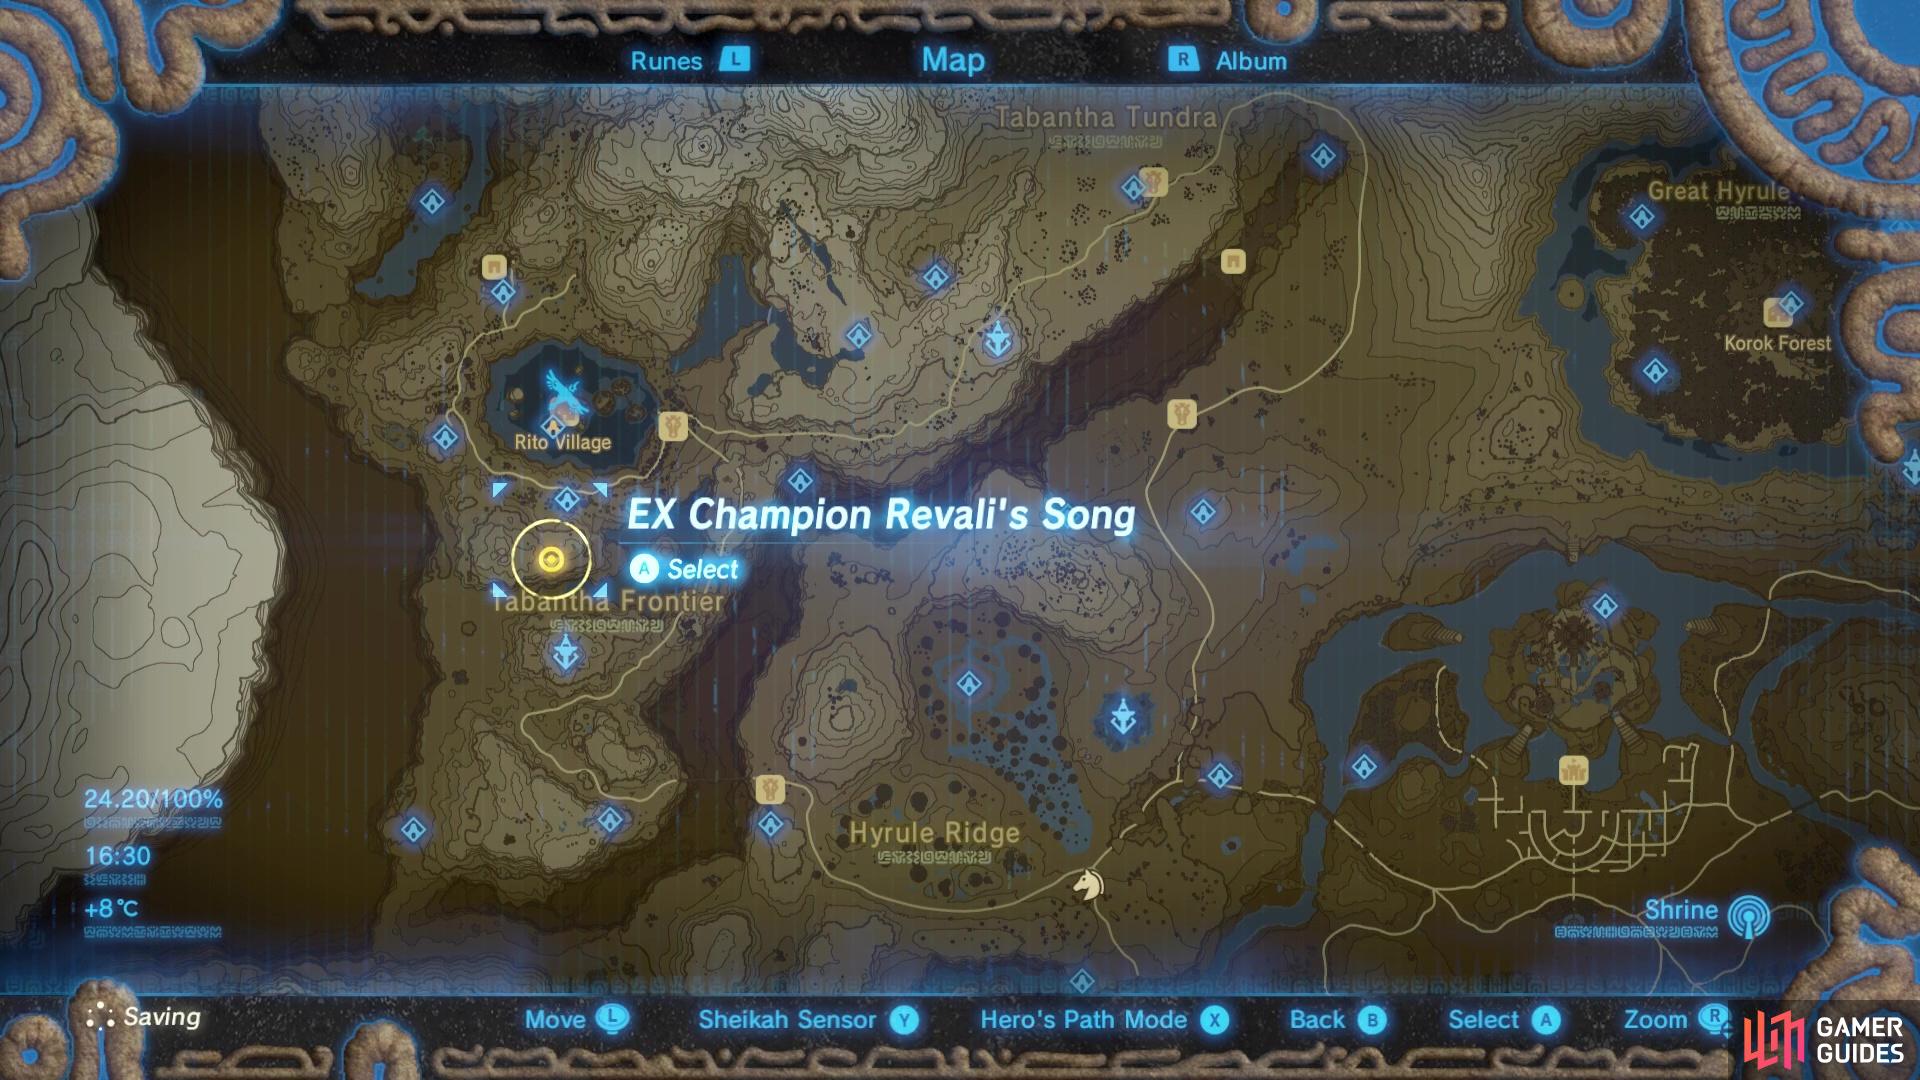 How to Start Ex Champion Revali's Song - Ex Champion Revali's - Champions' (DLC 2) | Legend of Zelda: Breath of the Wild | Gamer Guides®